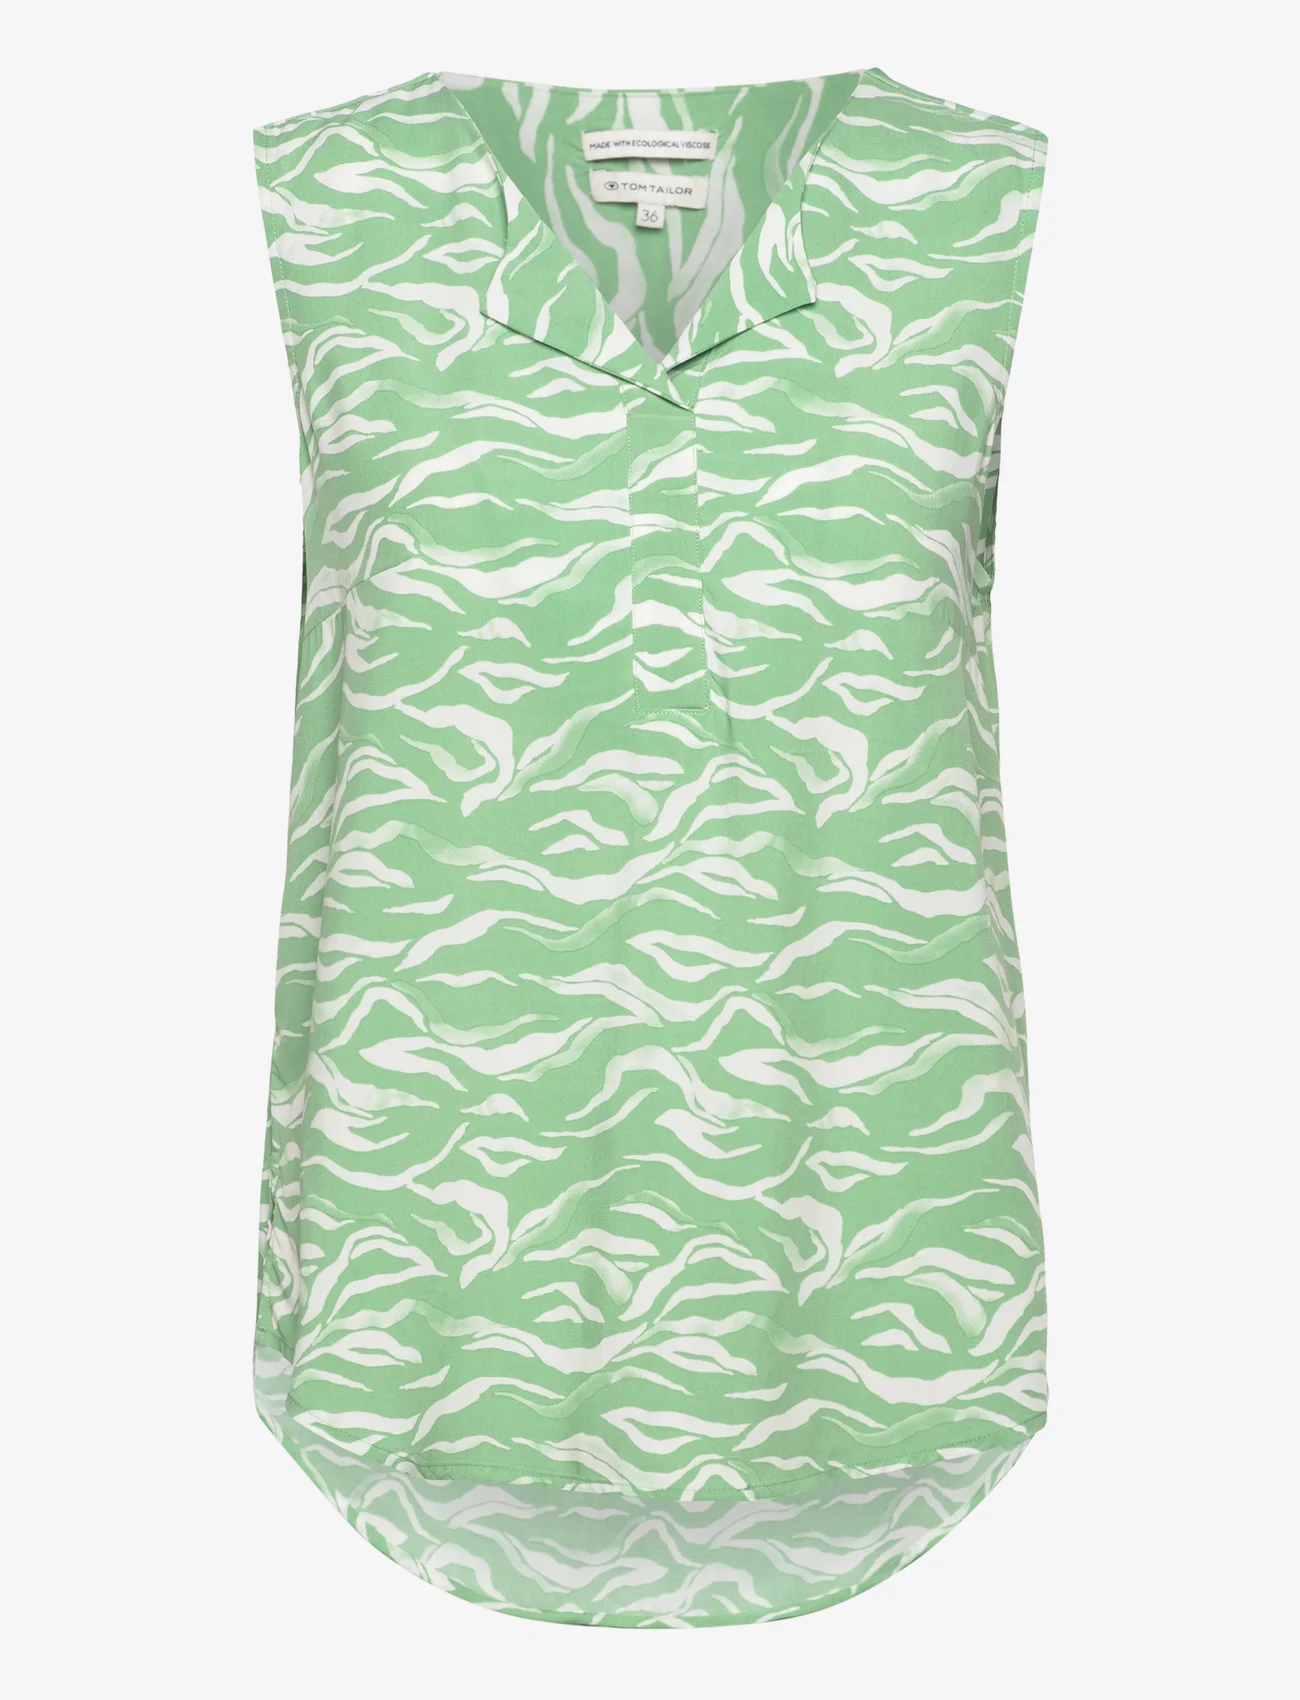 Tom Tailor - blouse top printed - hihattomat puserot - green small wavy design - 0